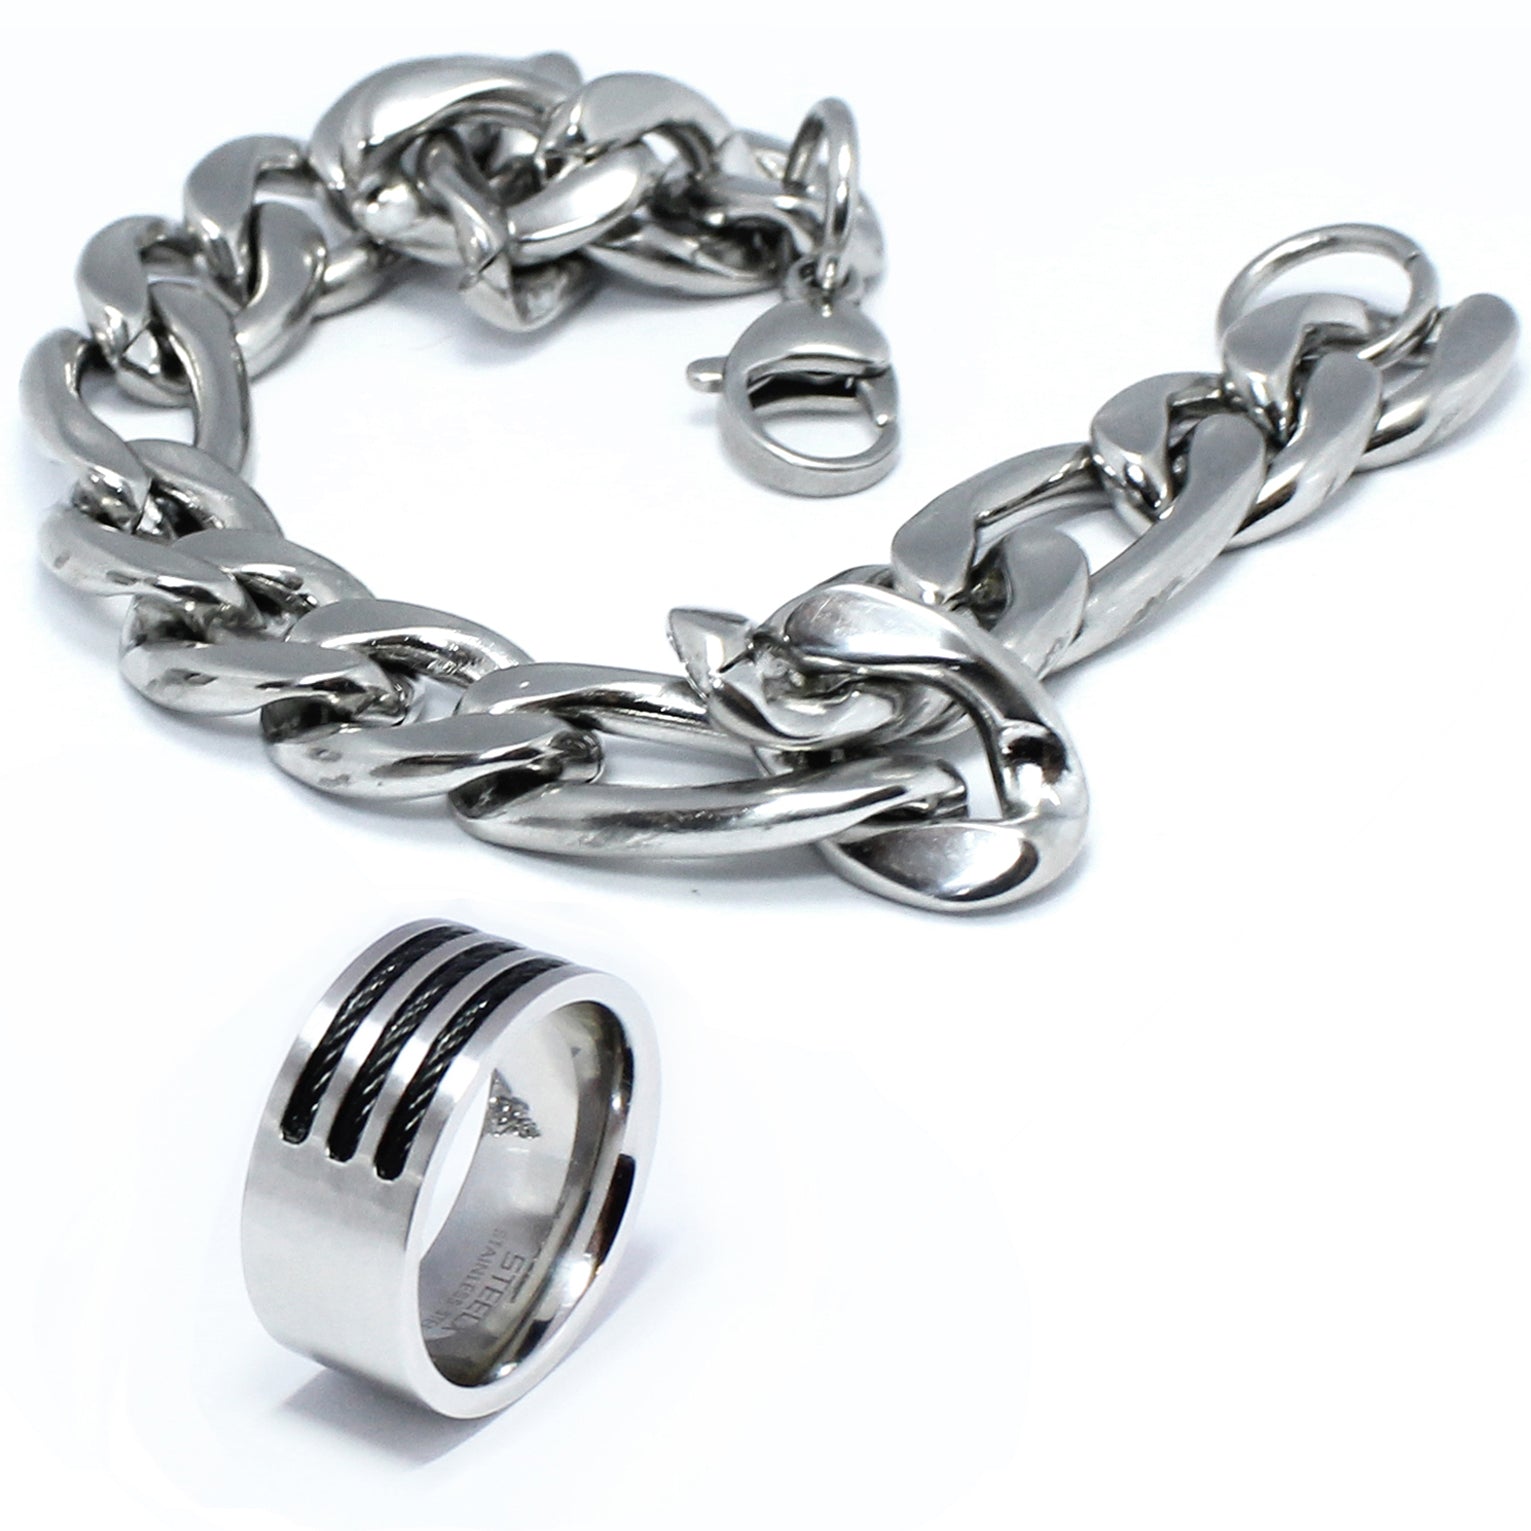 STEEL - Stainless Steel Ring and Linked Bracelet Duo Size 9, 8.5